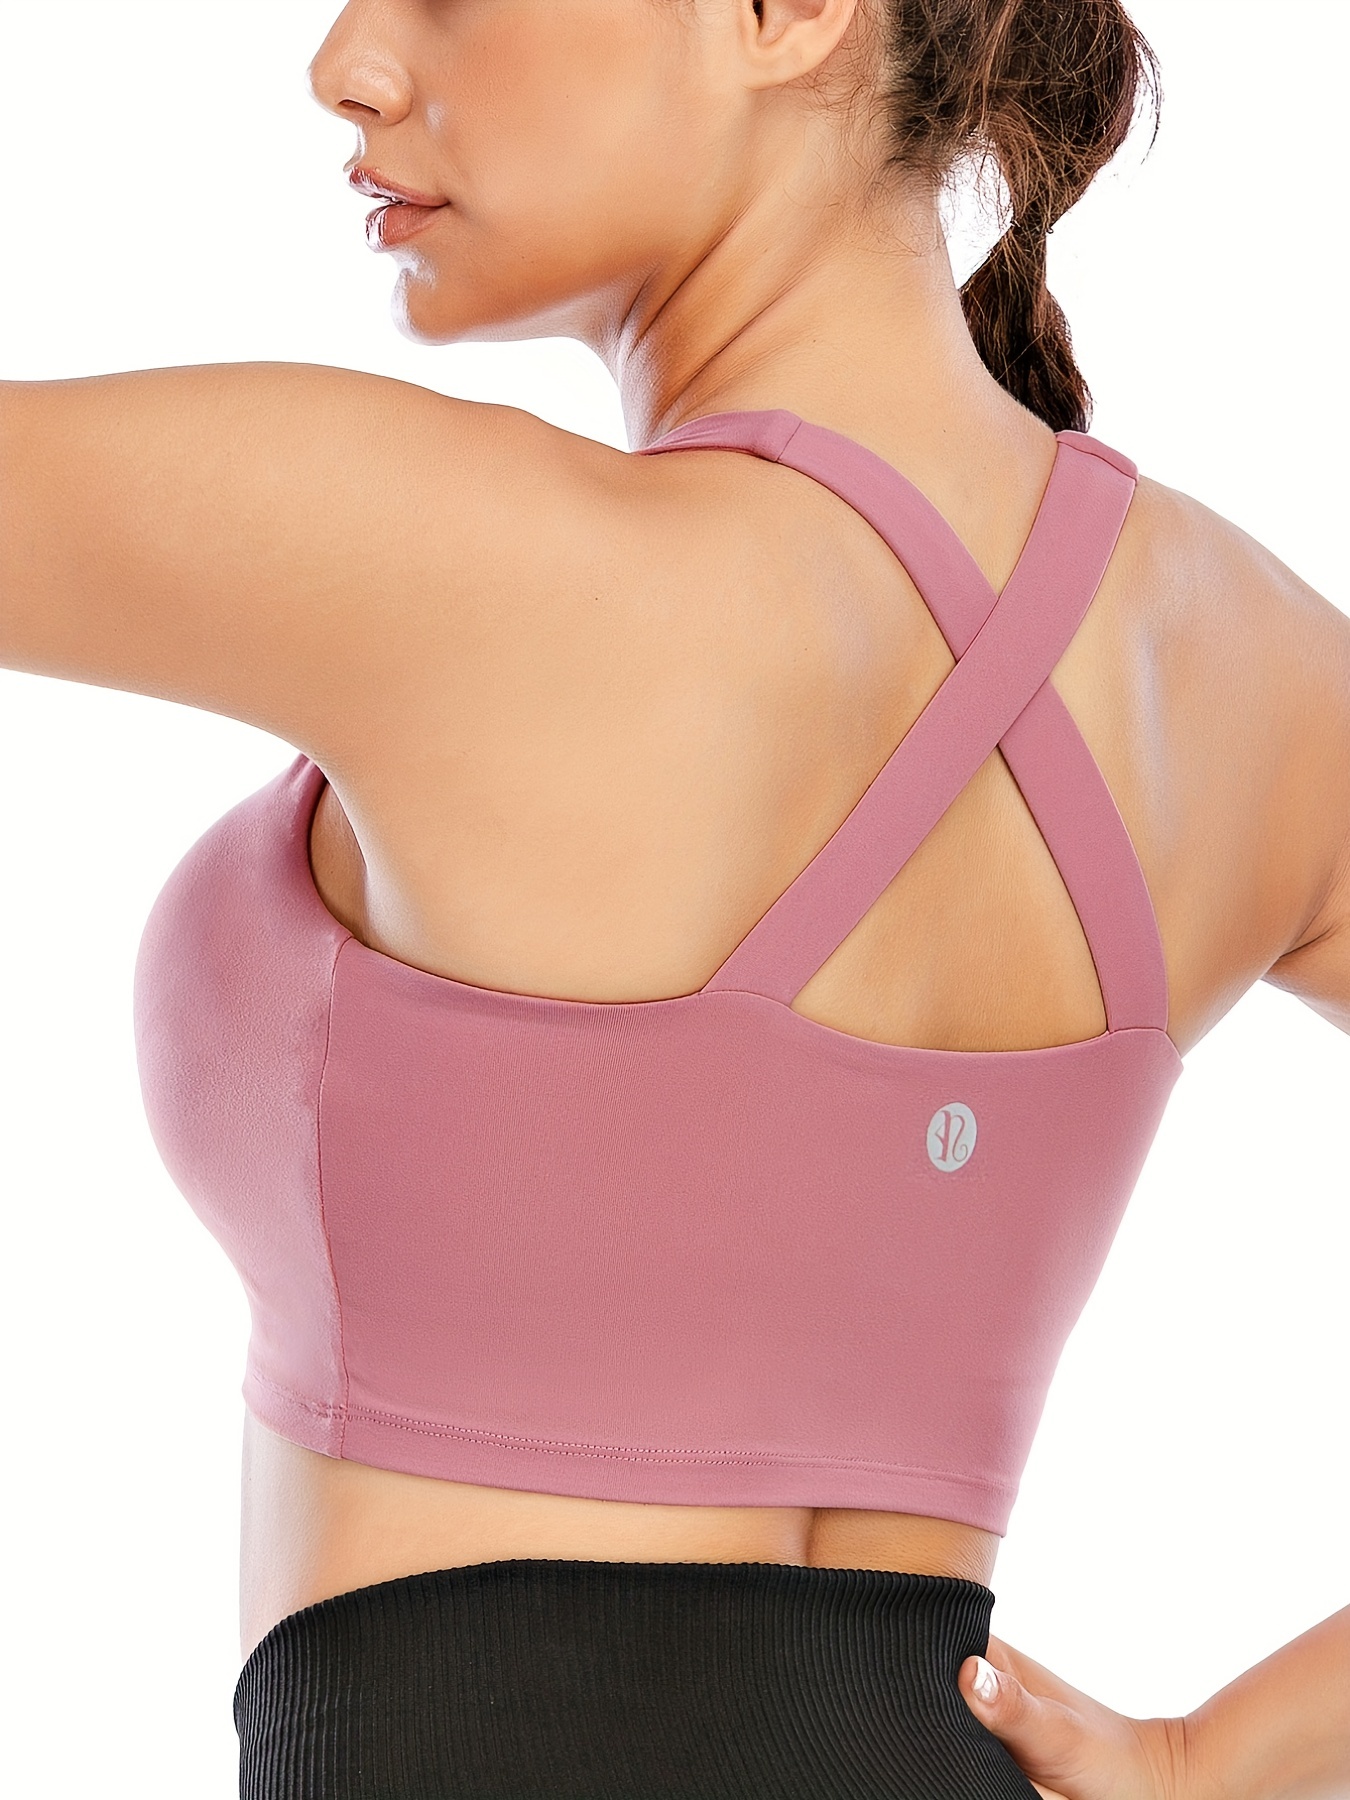 UUE Adjustable Longline Sports Bra for Women, Padded Medium Support Yoga Bra  with Removable Cups Workout Tank Tops Pink S at  Women's Clothing  store